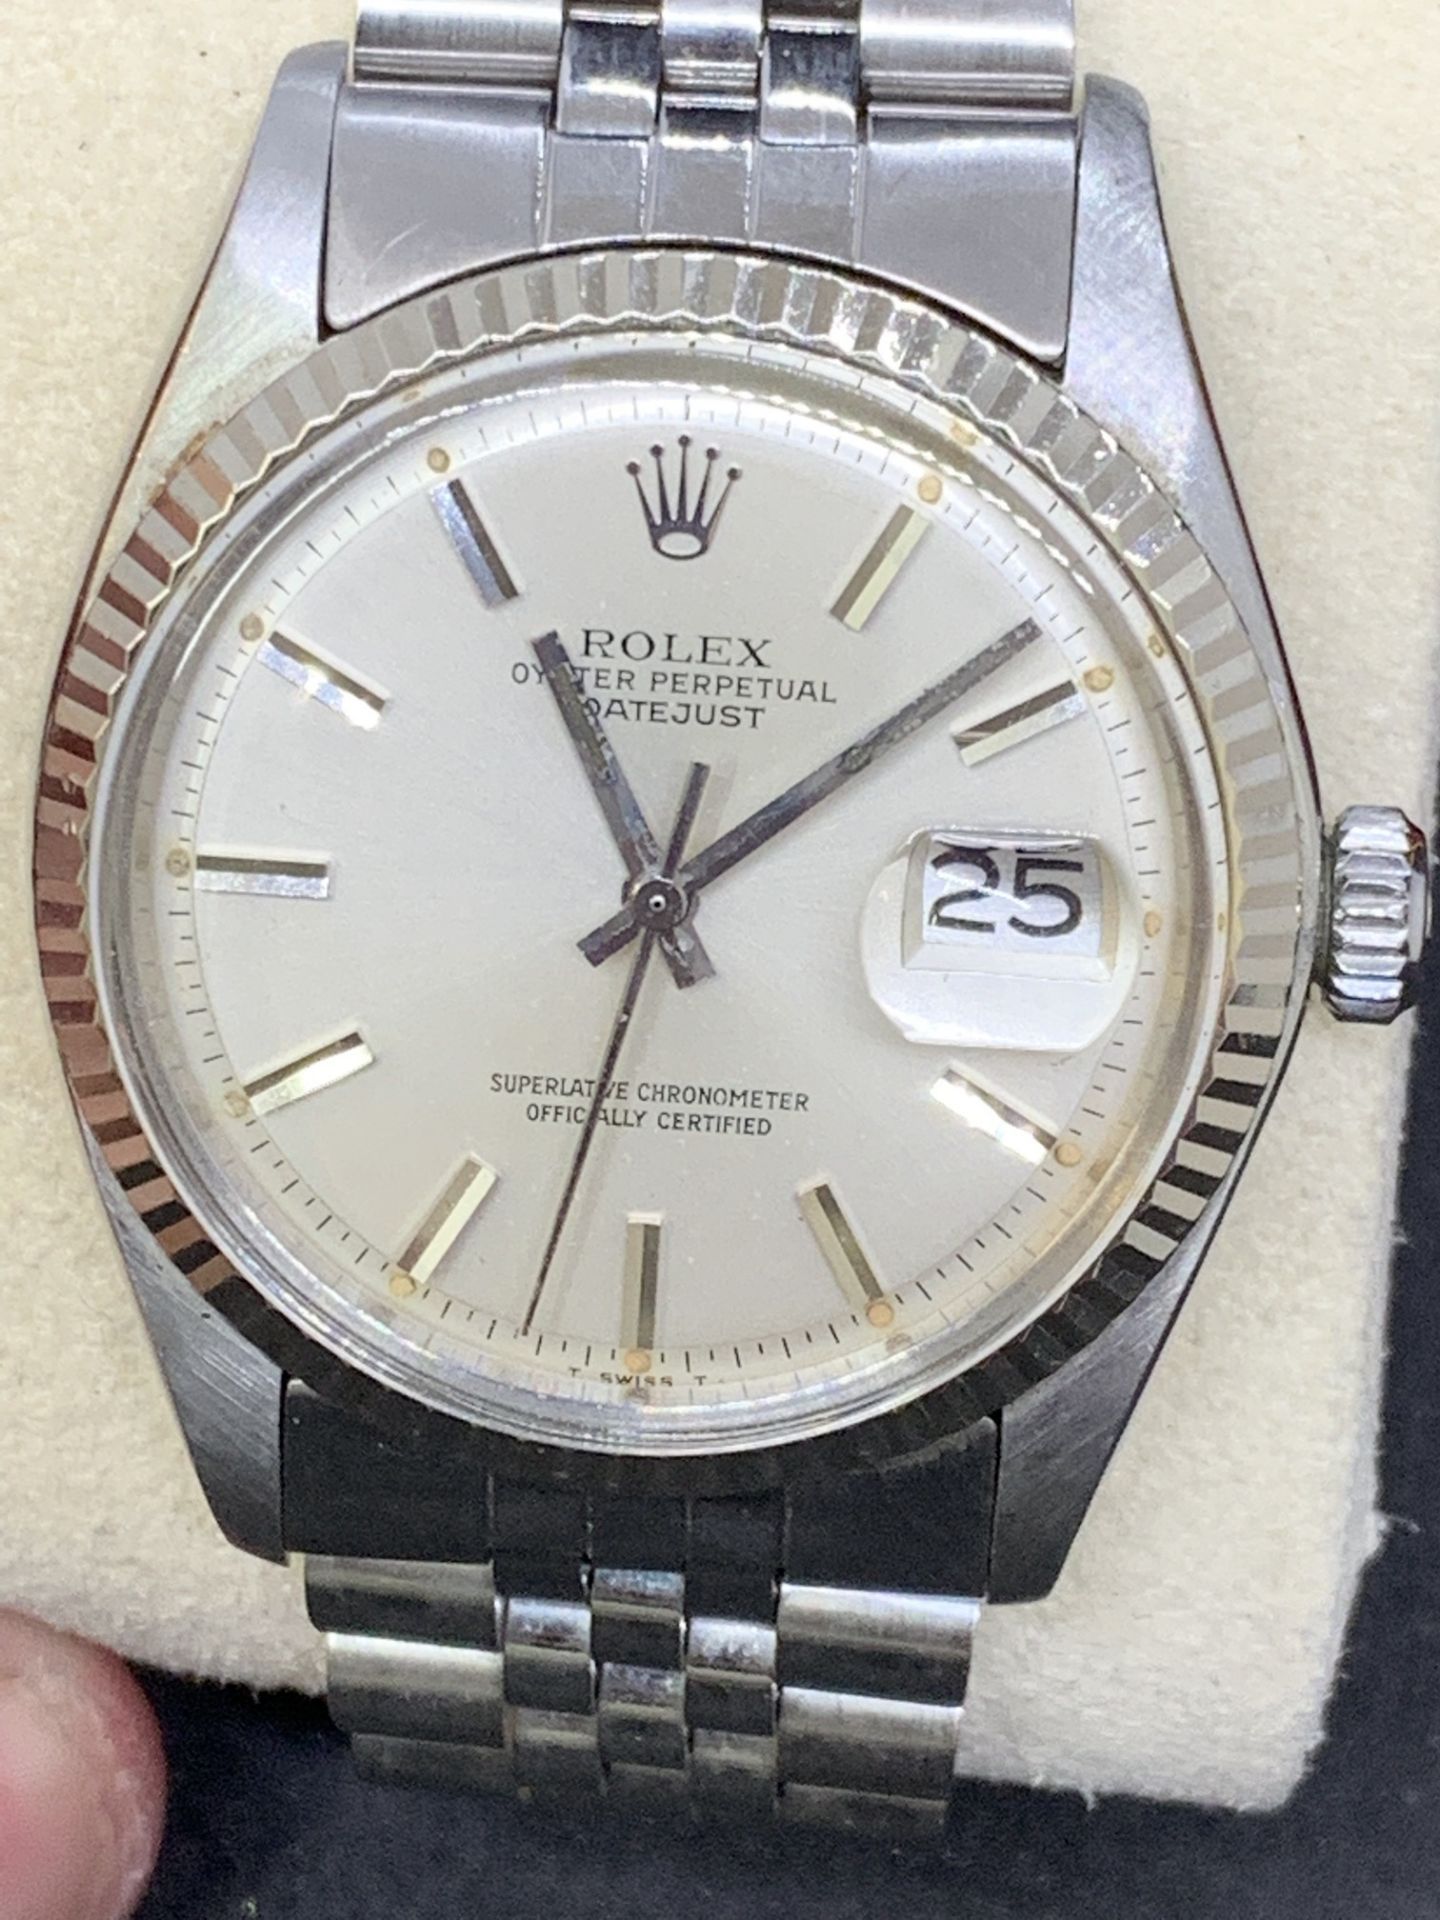 ROLEX DATEJUST WHITE GOLD & STAINLESS STEEL WATCH - APPROX 1980's - Image 6 of 8